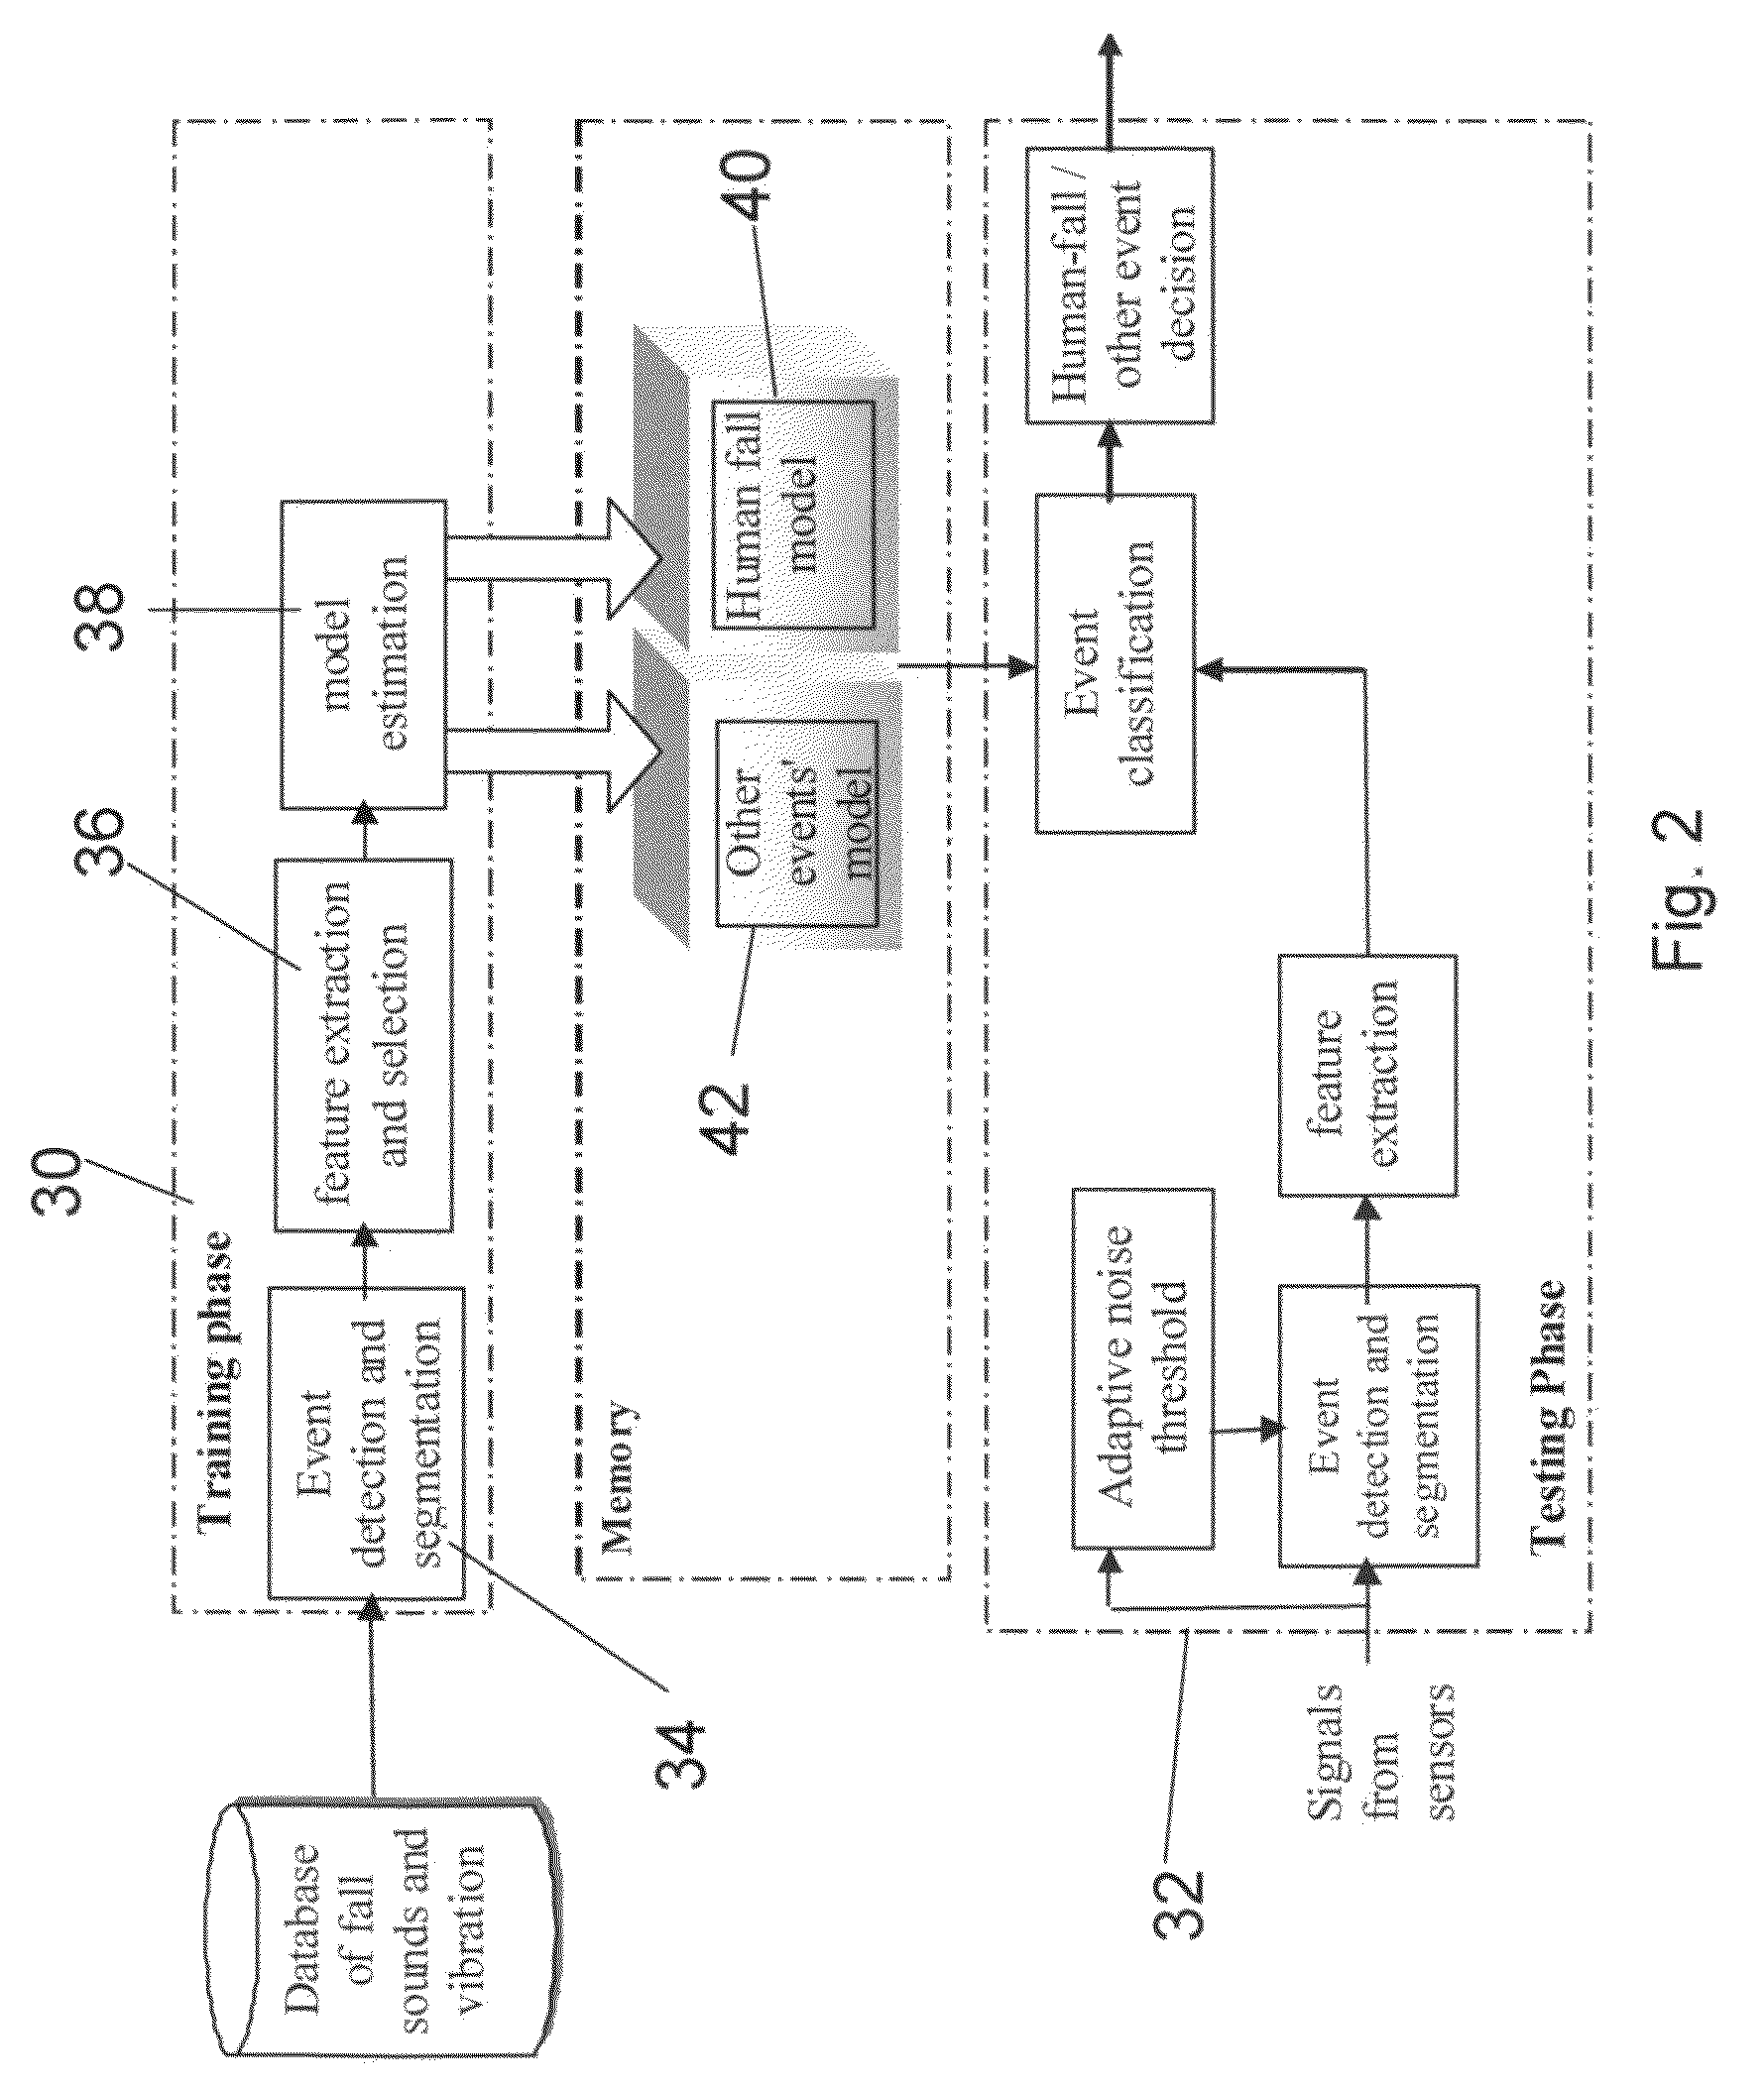 System for automatic fall detection for elderly people